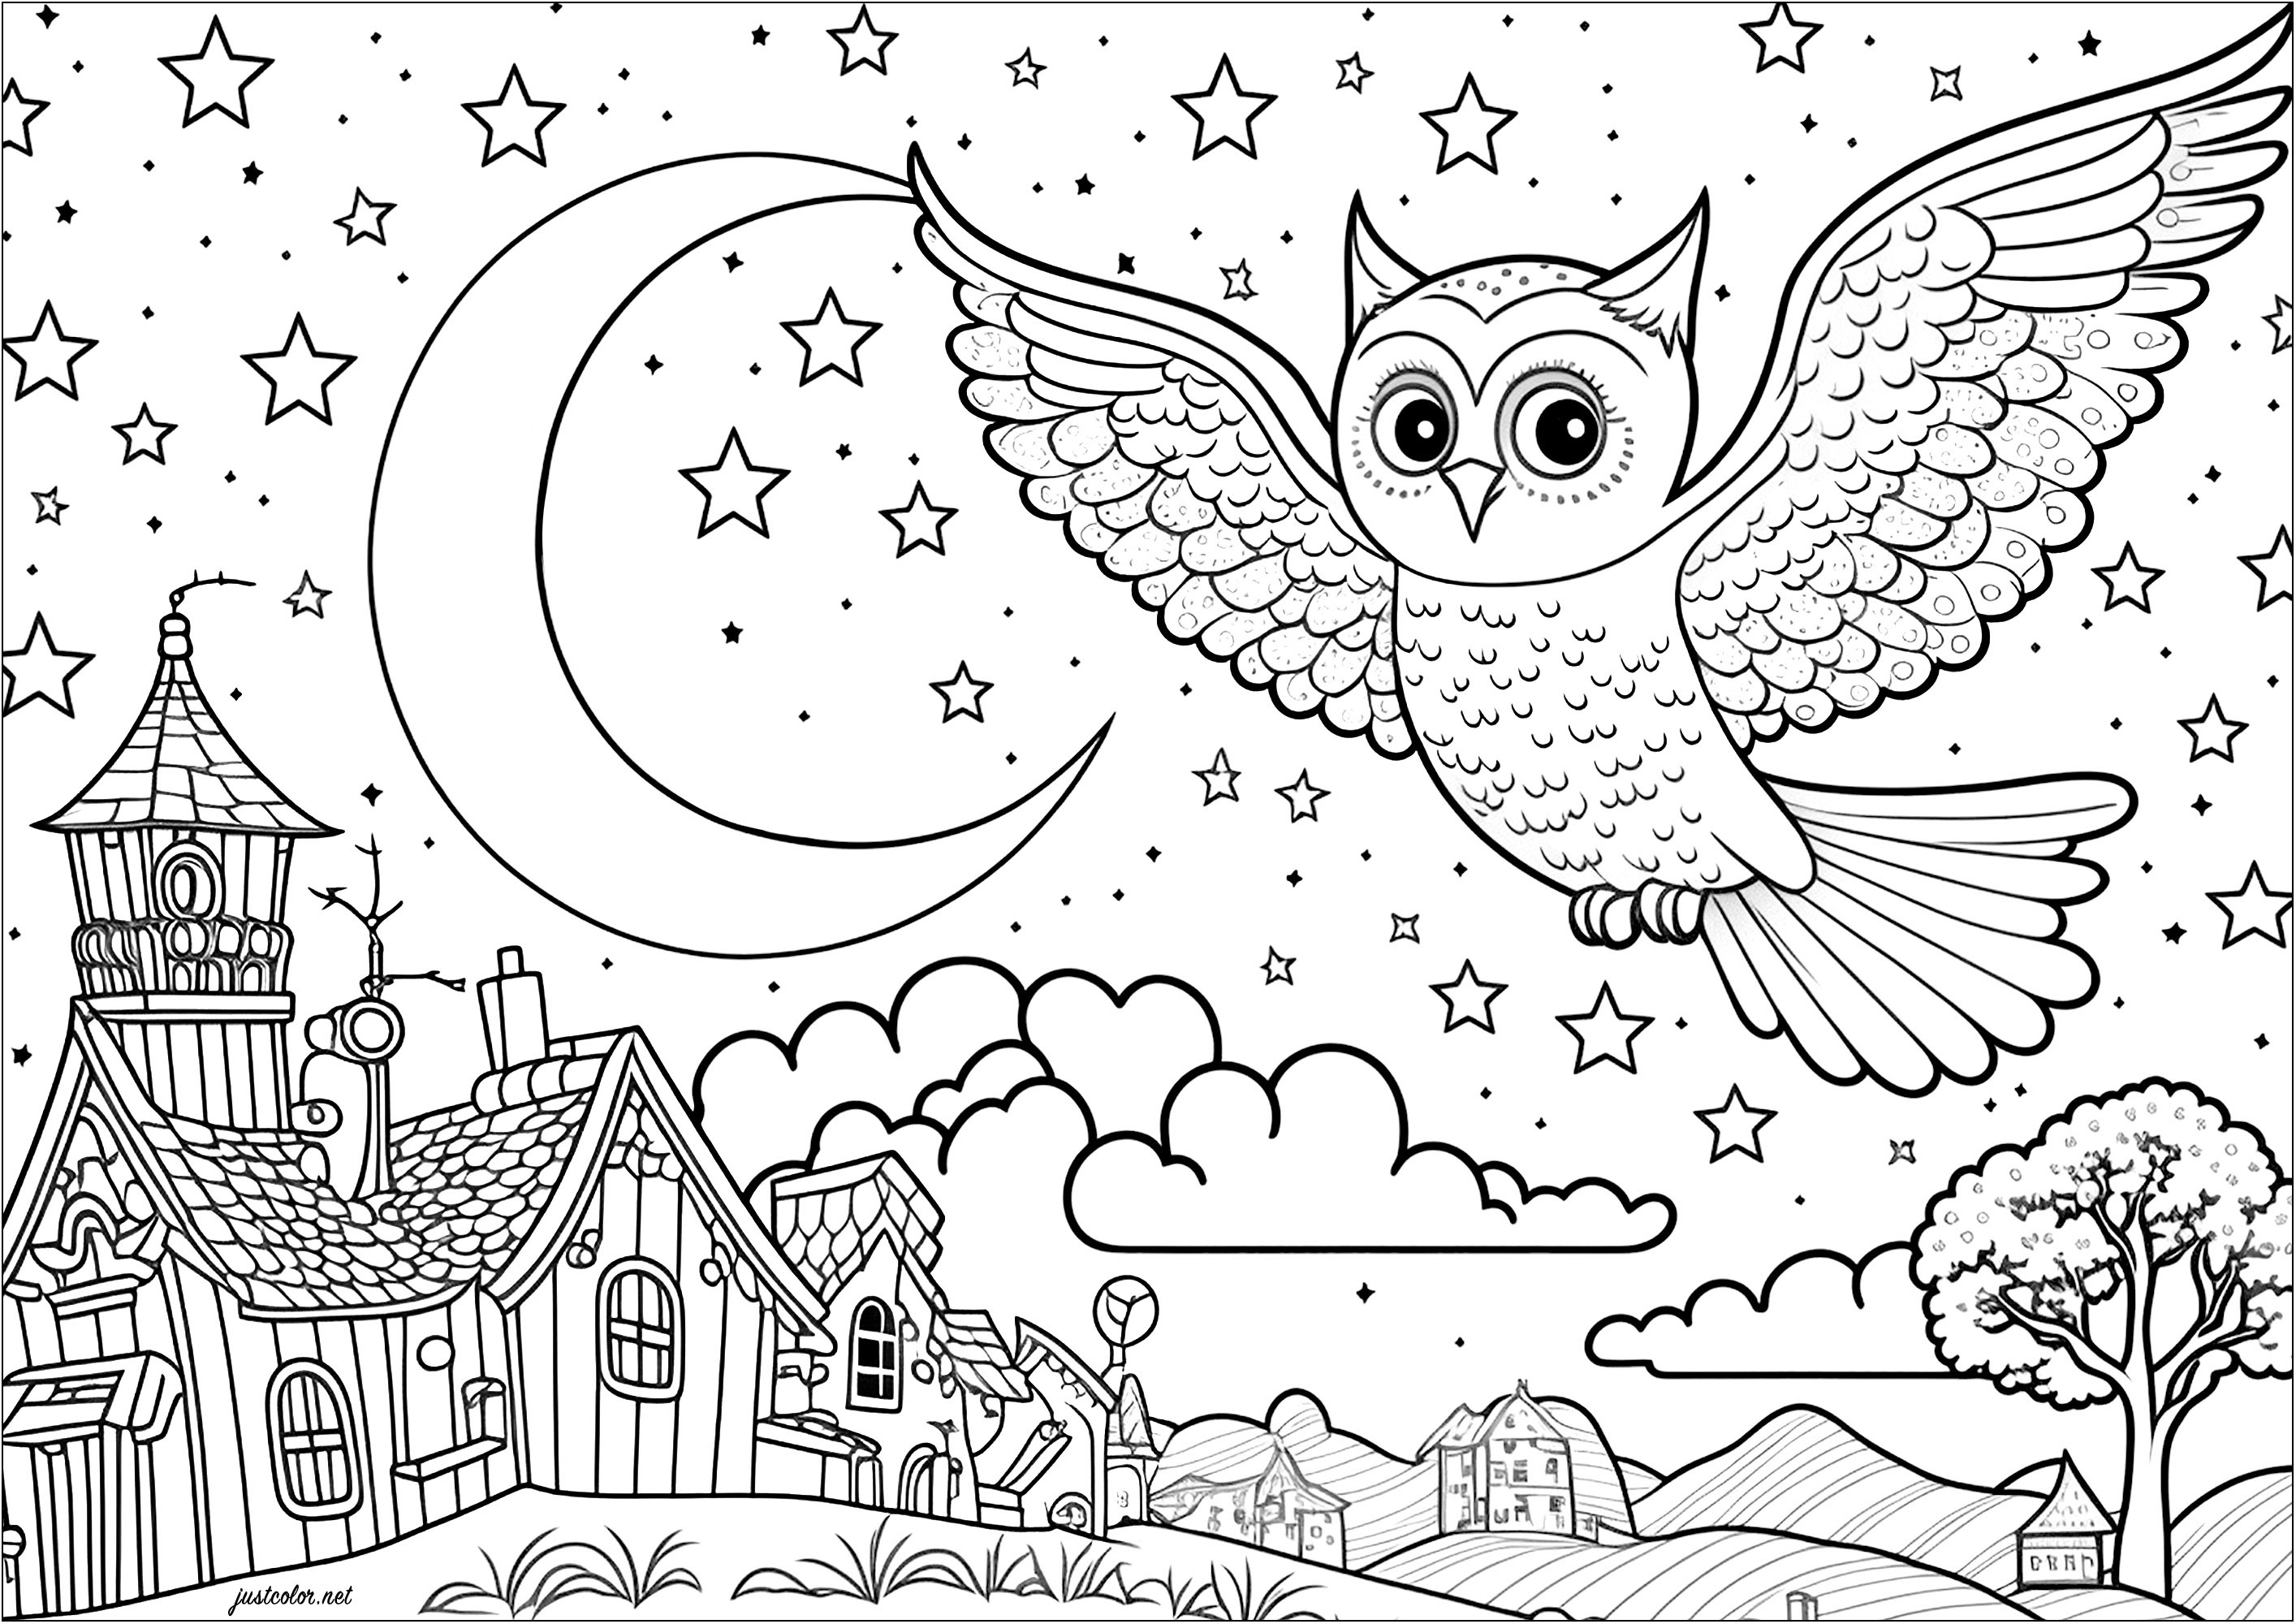 Coloring of an owl flying over a village. This beautiful owl is flying while observing the small village nearby.
